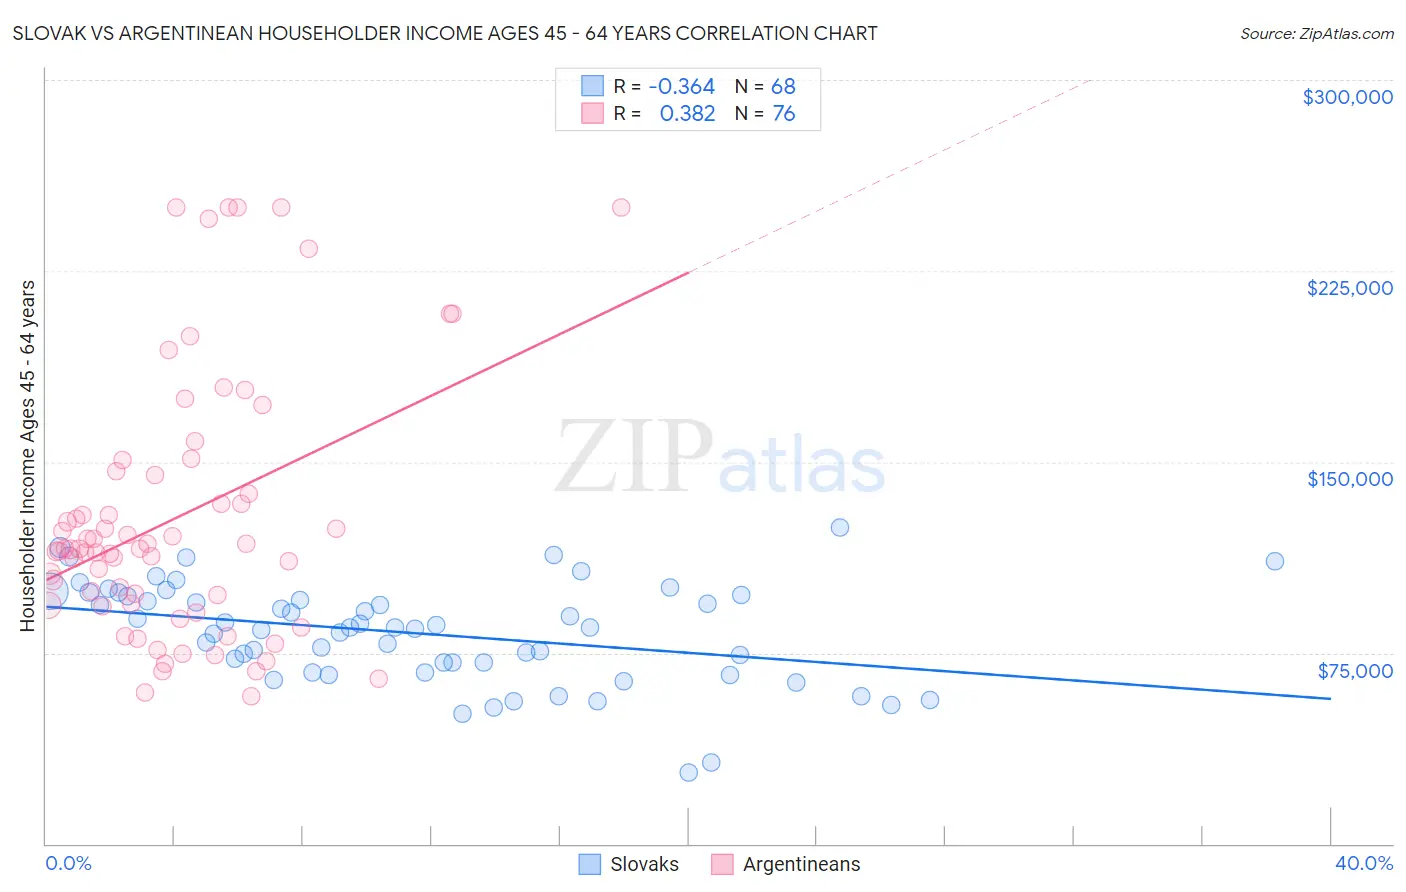 Slovak vs Argentinean Householder Income Ages 45 - 64 years